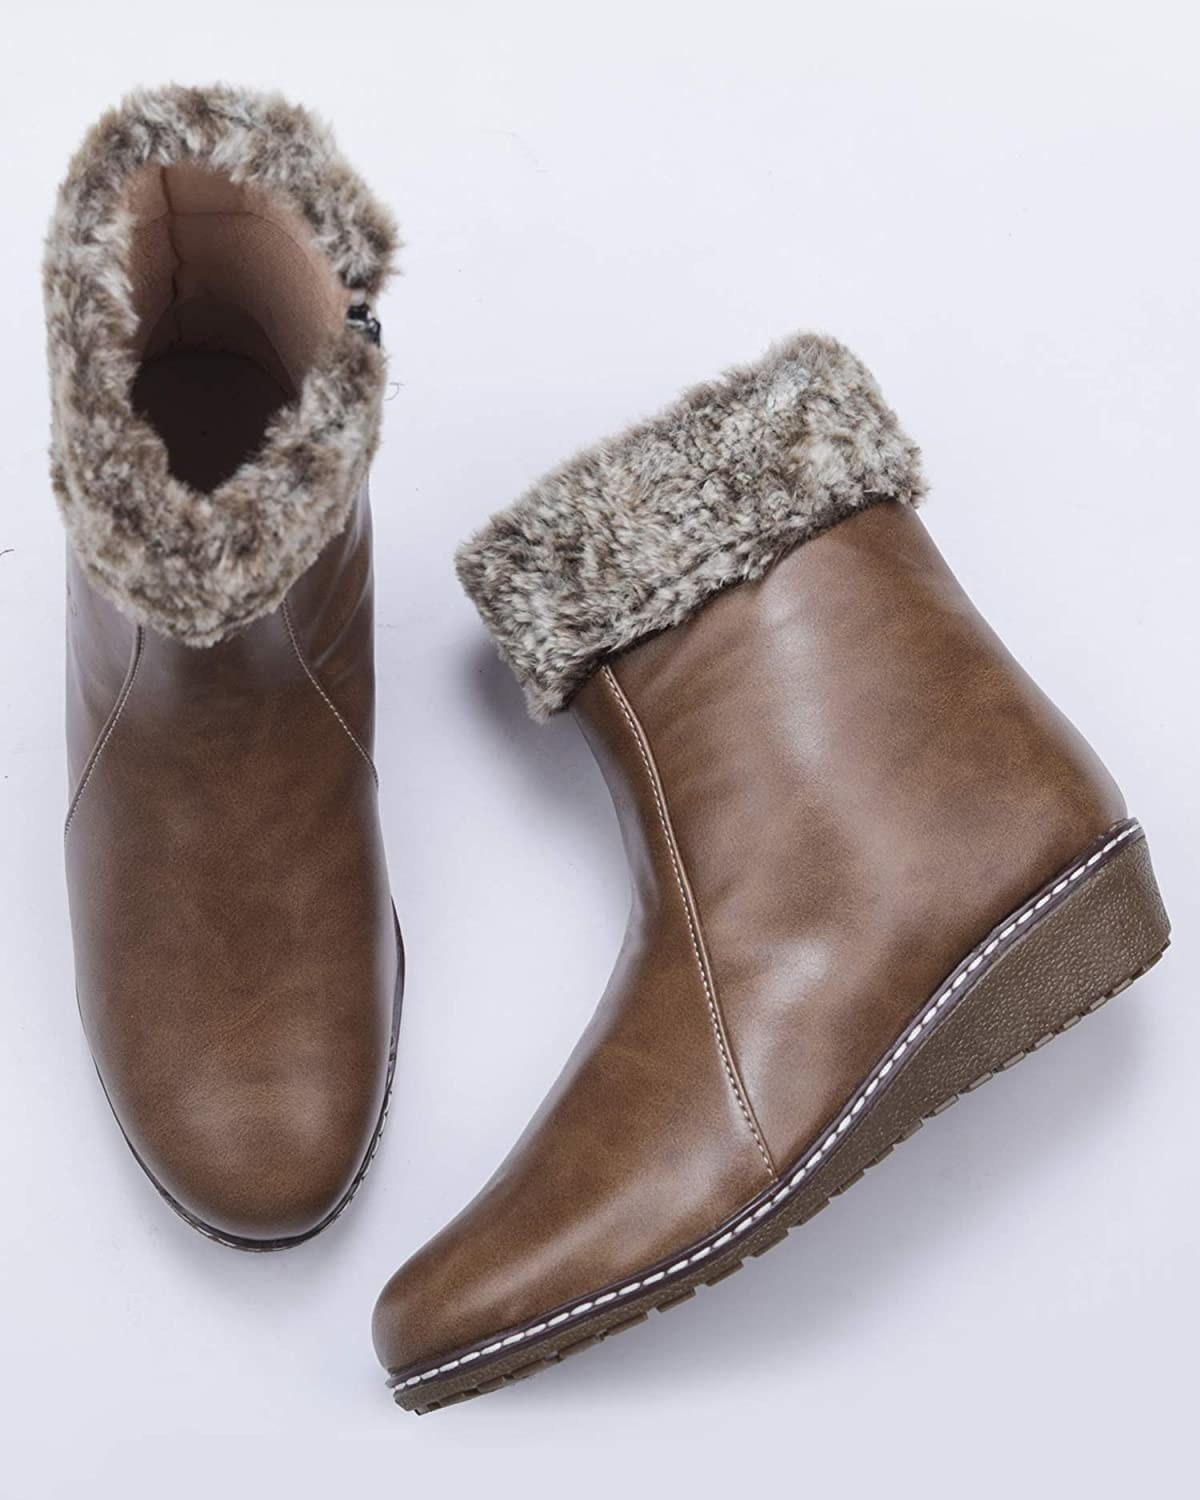 A pair of brown boots with fur on them 